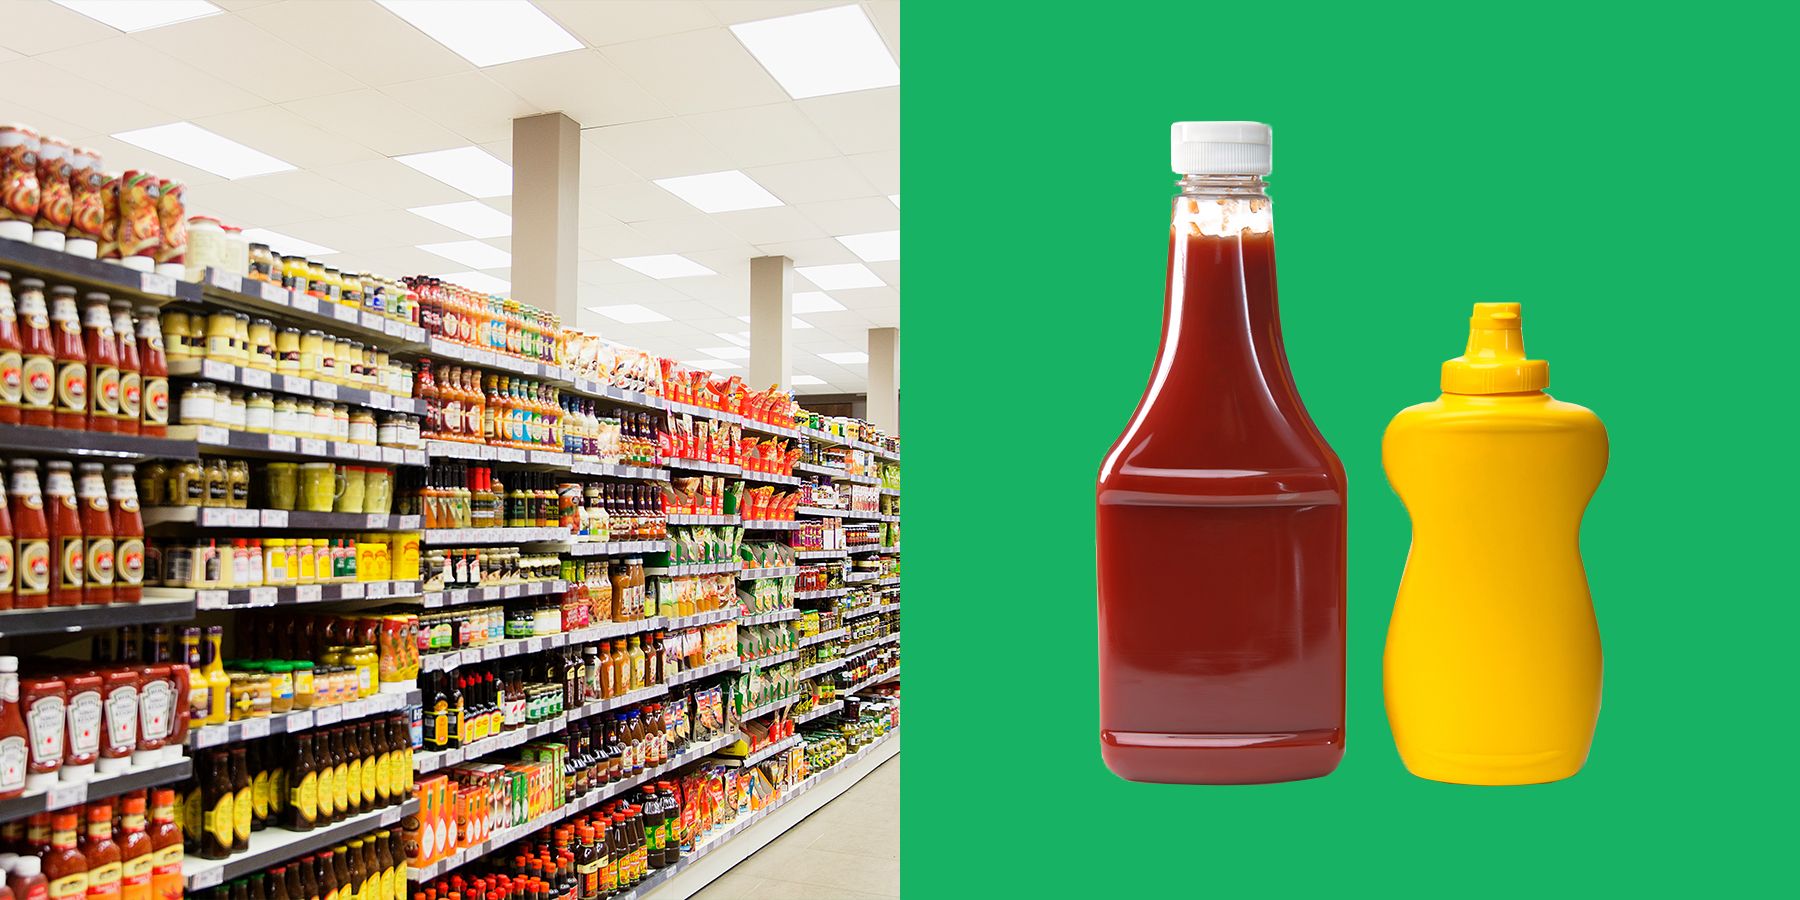 Mayo, Salad Dressing, Ketchup: How Long Can Condiments Last in the  Refrigerator? – Cherry Creek Nutrition